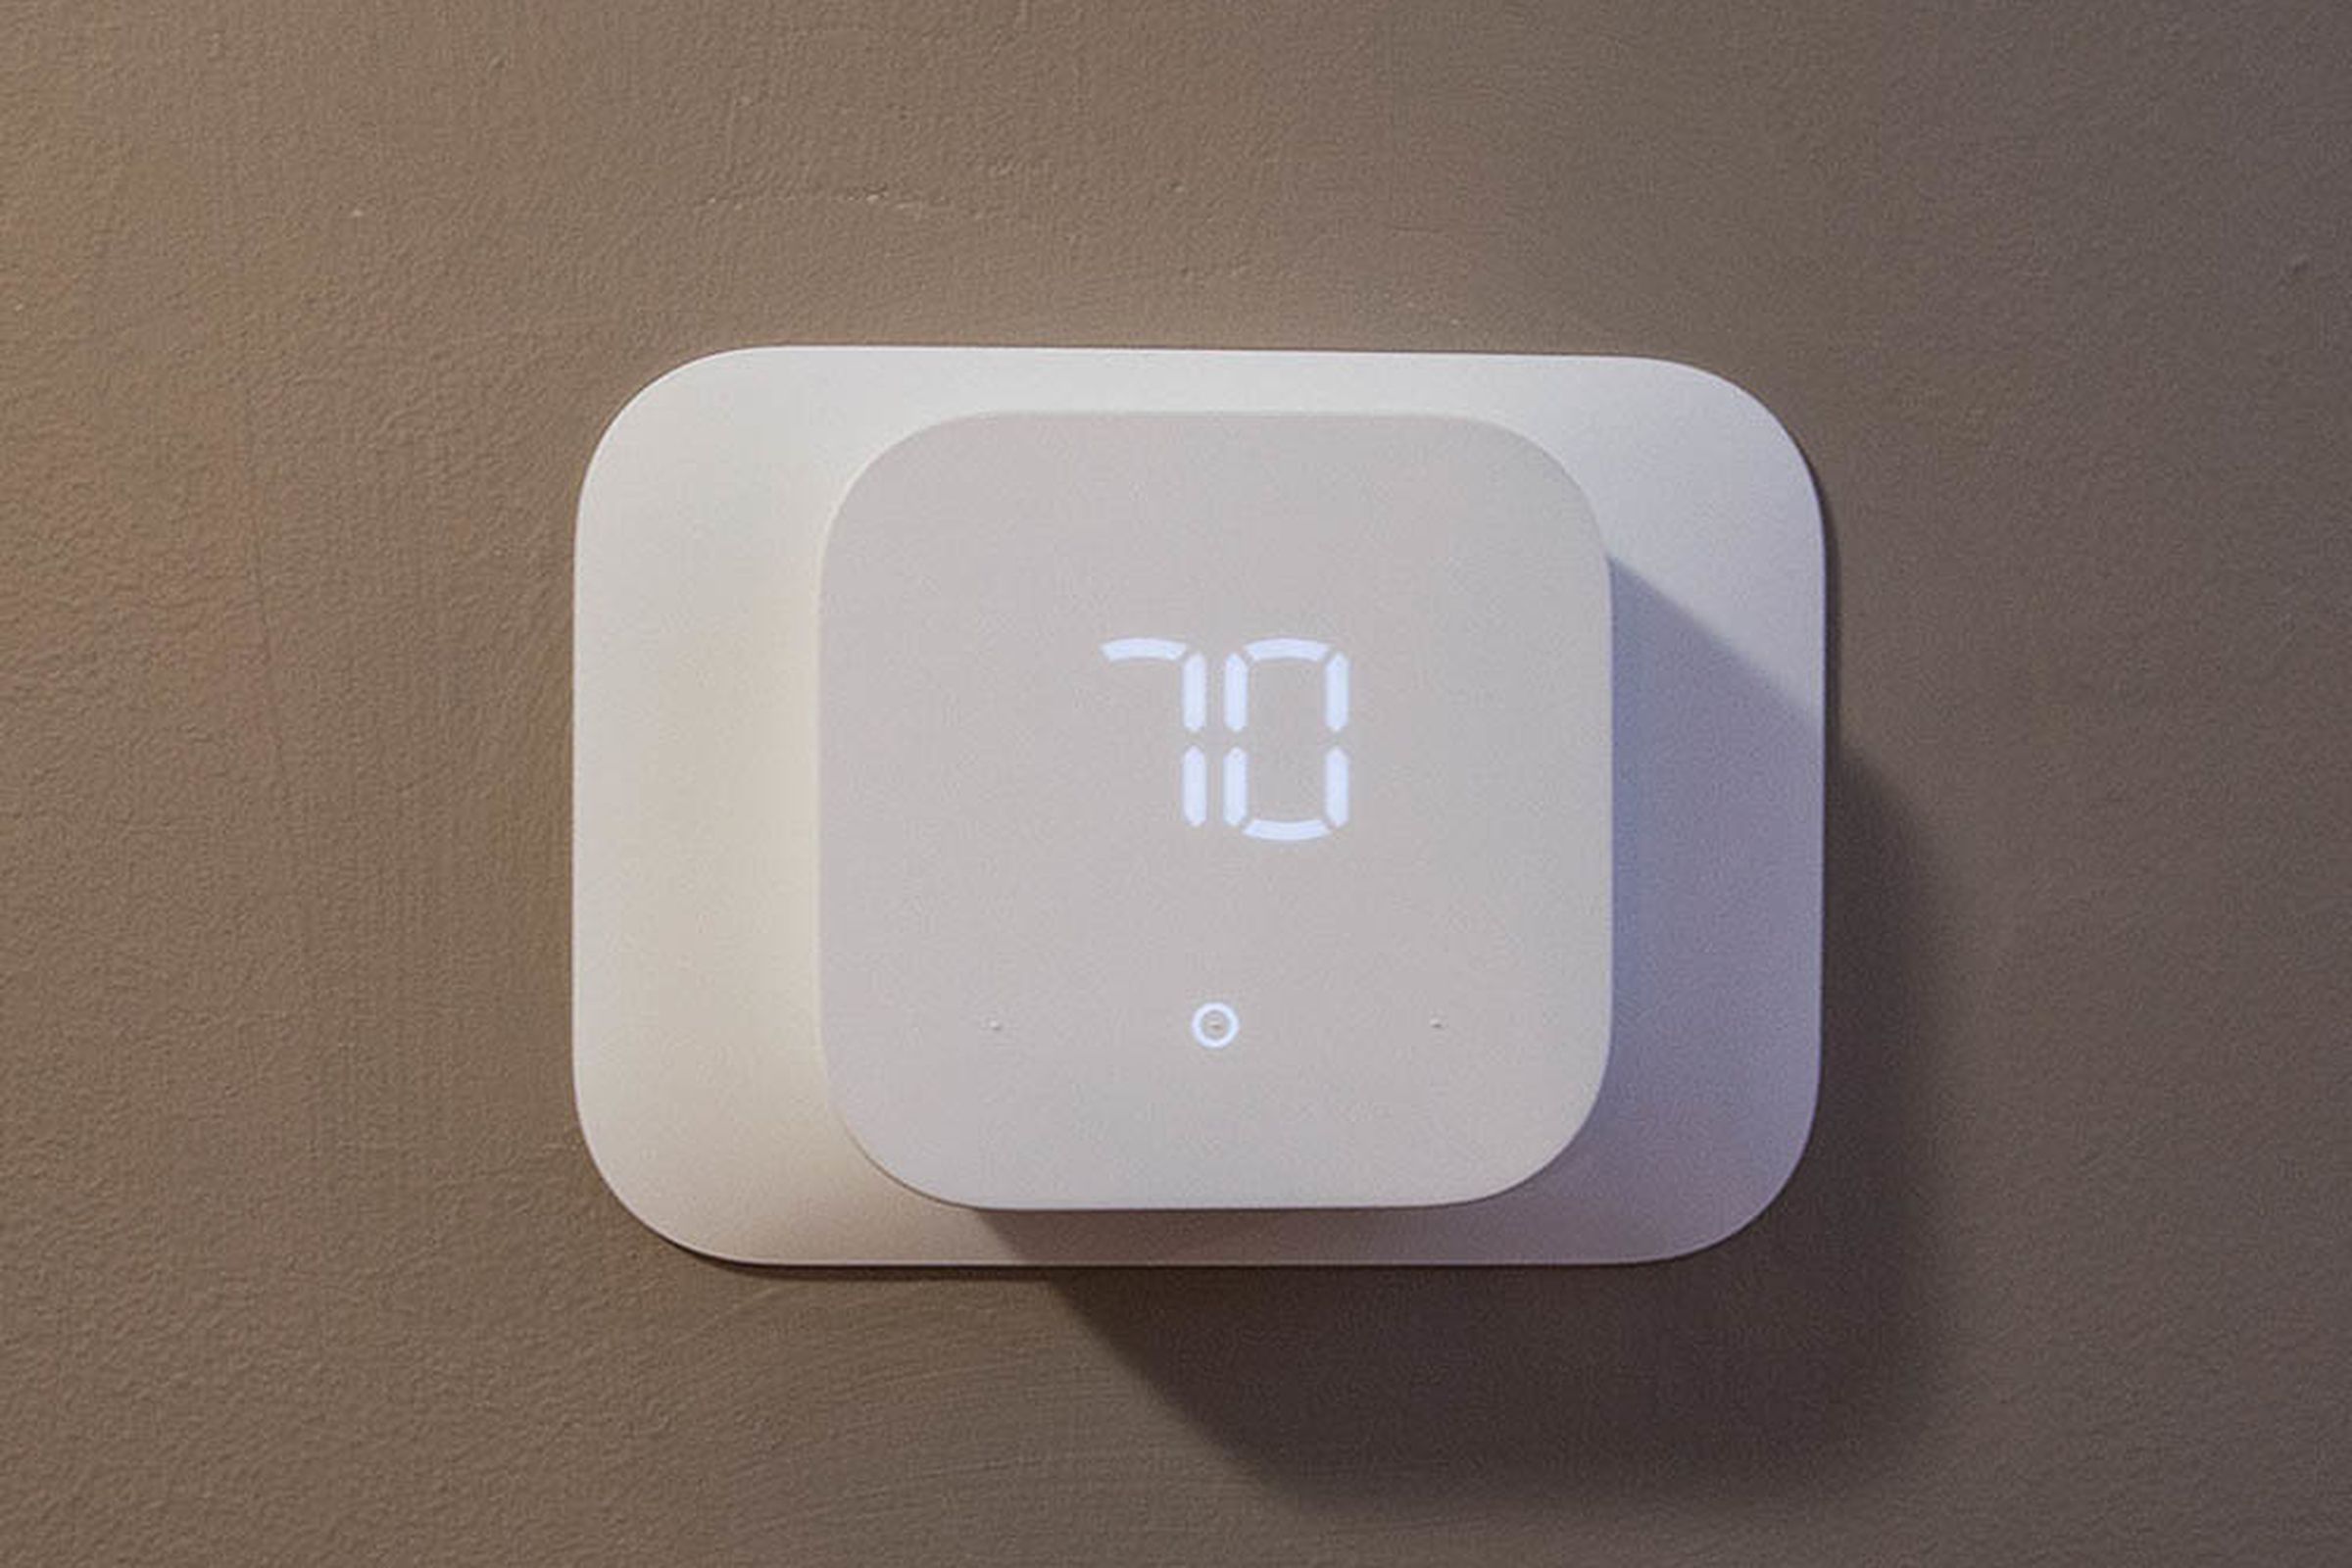 The lowest price ever on this smart thermostat